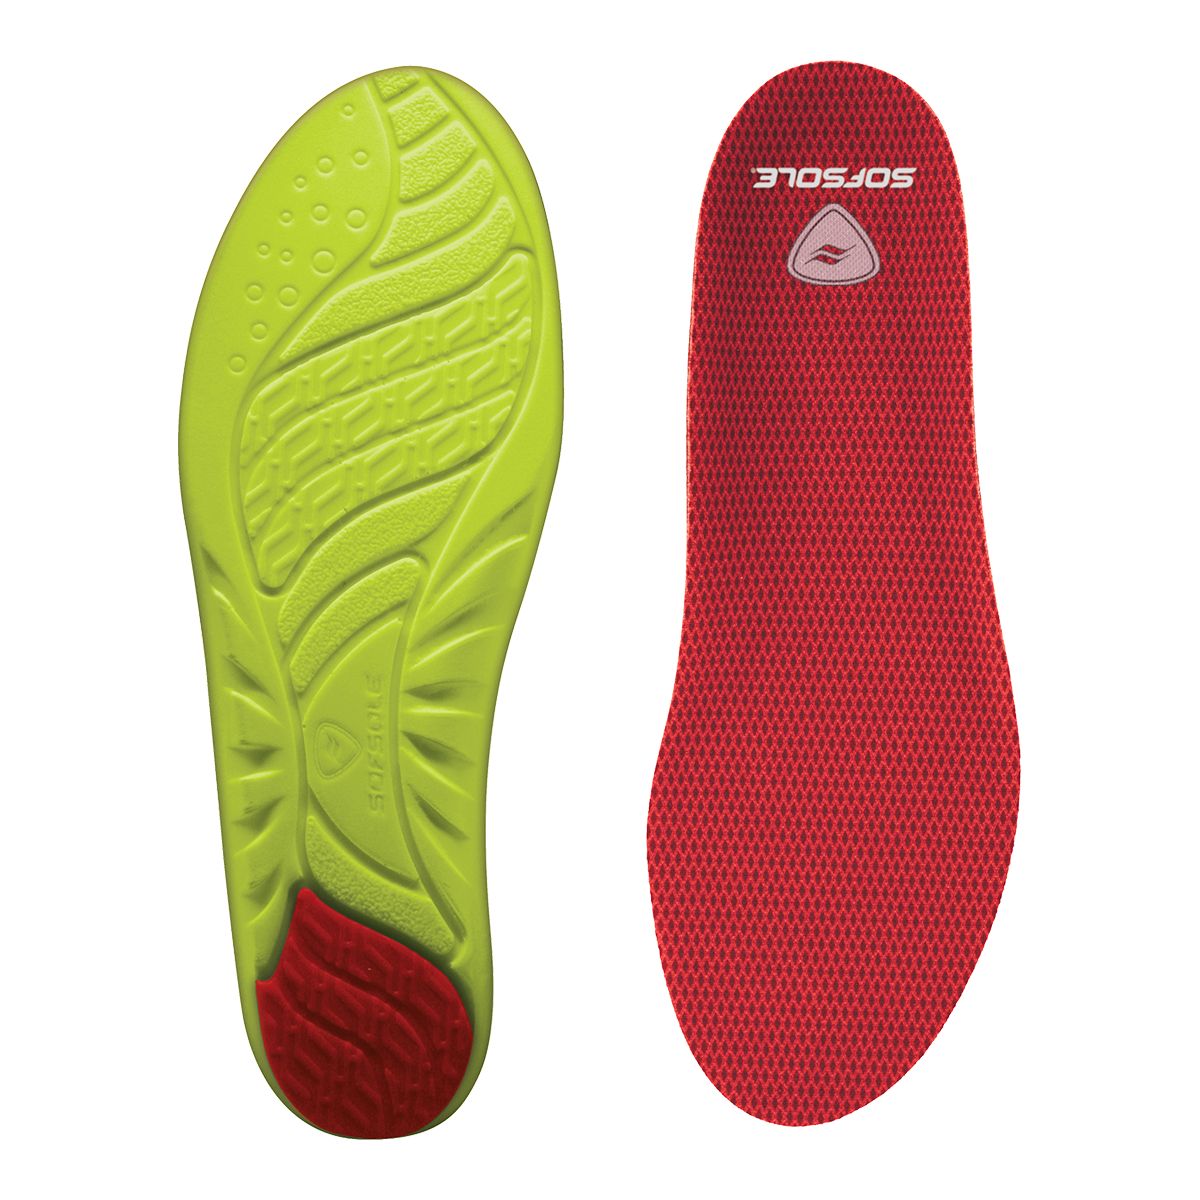 Image of Sof Sole Women's Arch Insoles Shoe Inserts